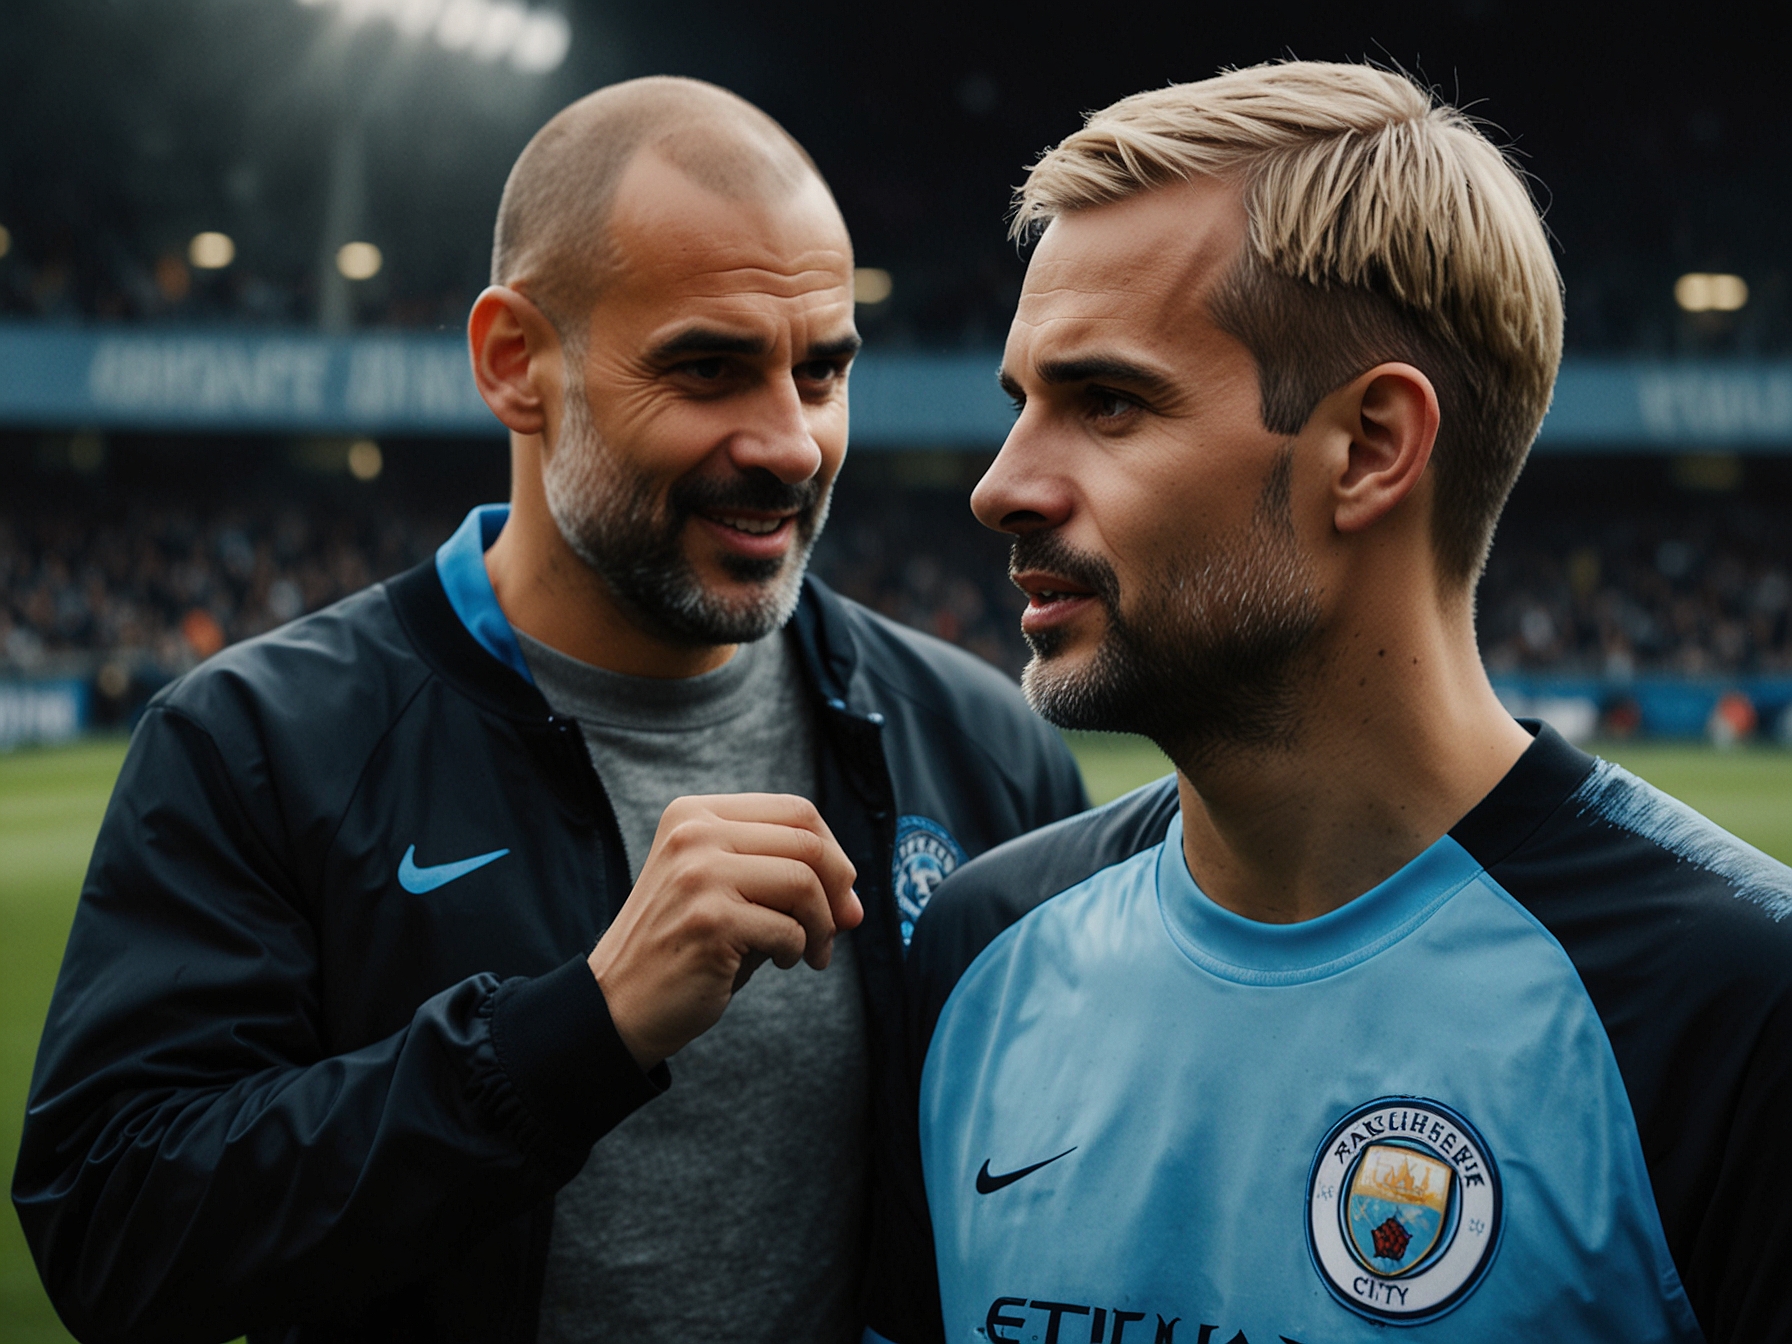 Pep Guardiola discusses strategies with Erling Haaland on the training ground. The image emphasizes their mutual respect and collaboration, essential for Manchester City's continued success.